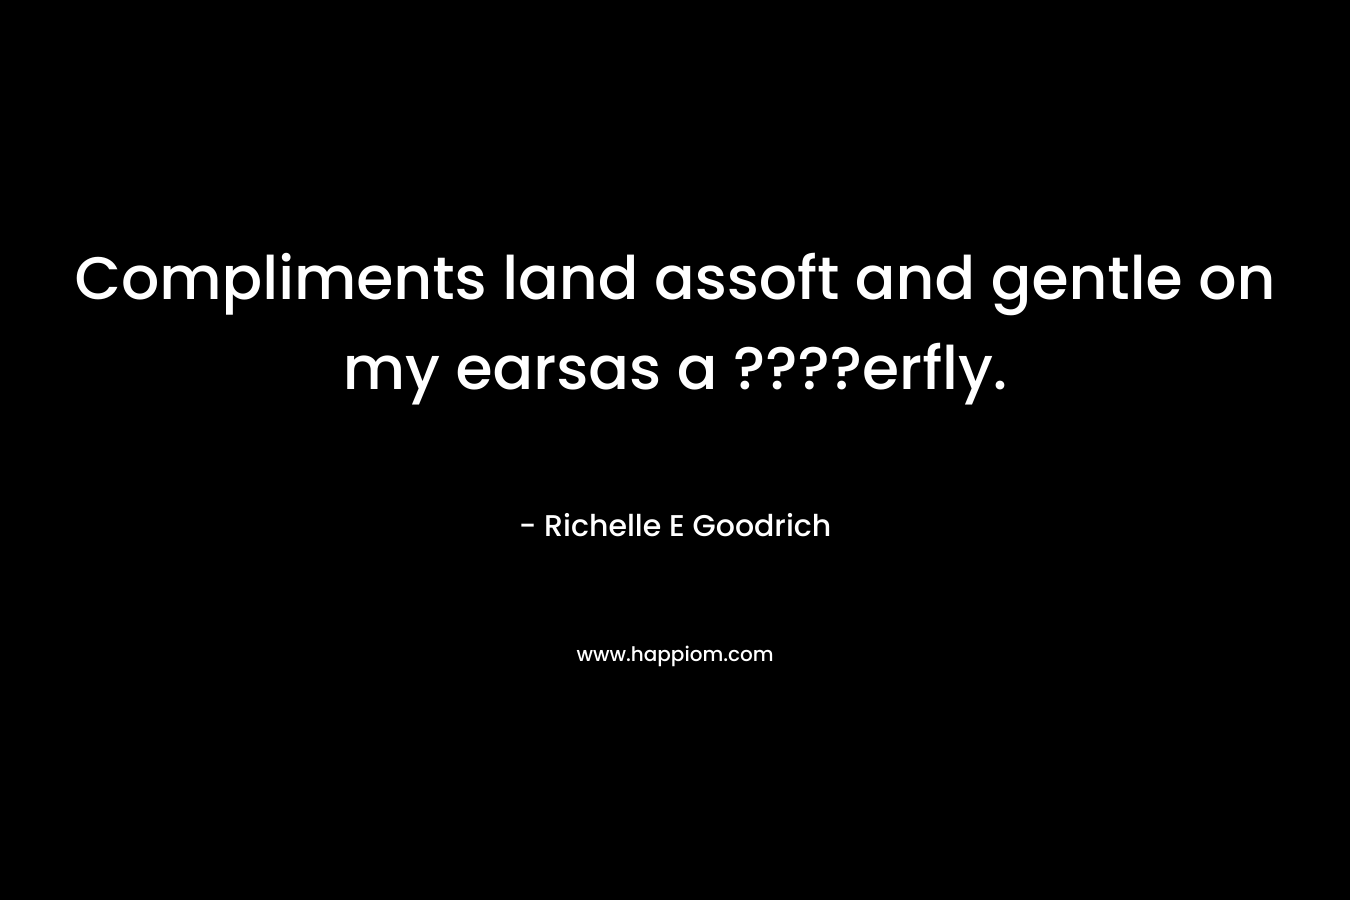 Compliments land assoft and gentle on my earsas a ????erfly. – Richelle E Goodrich